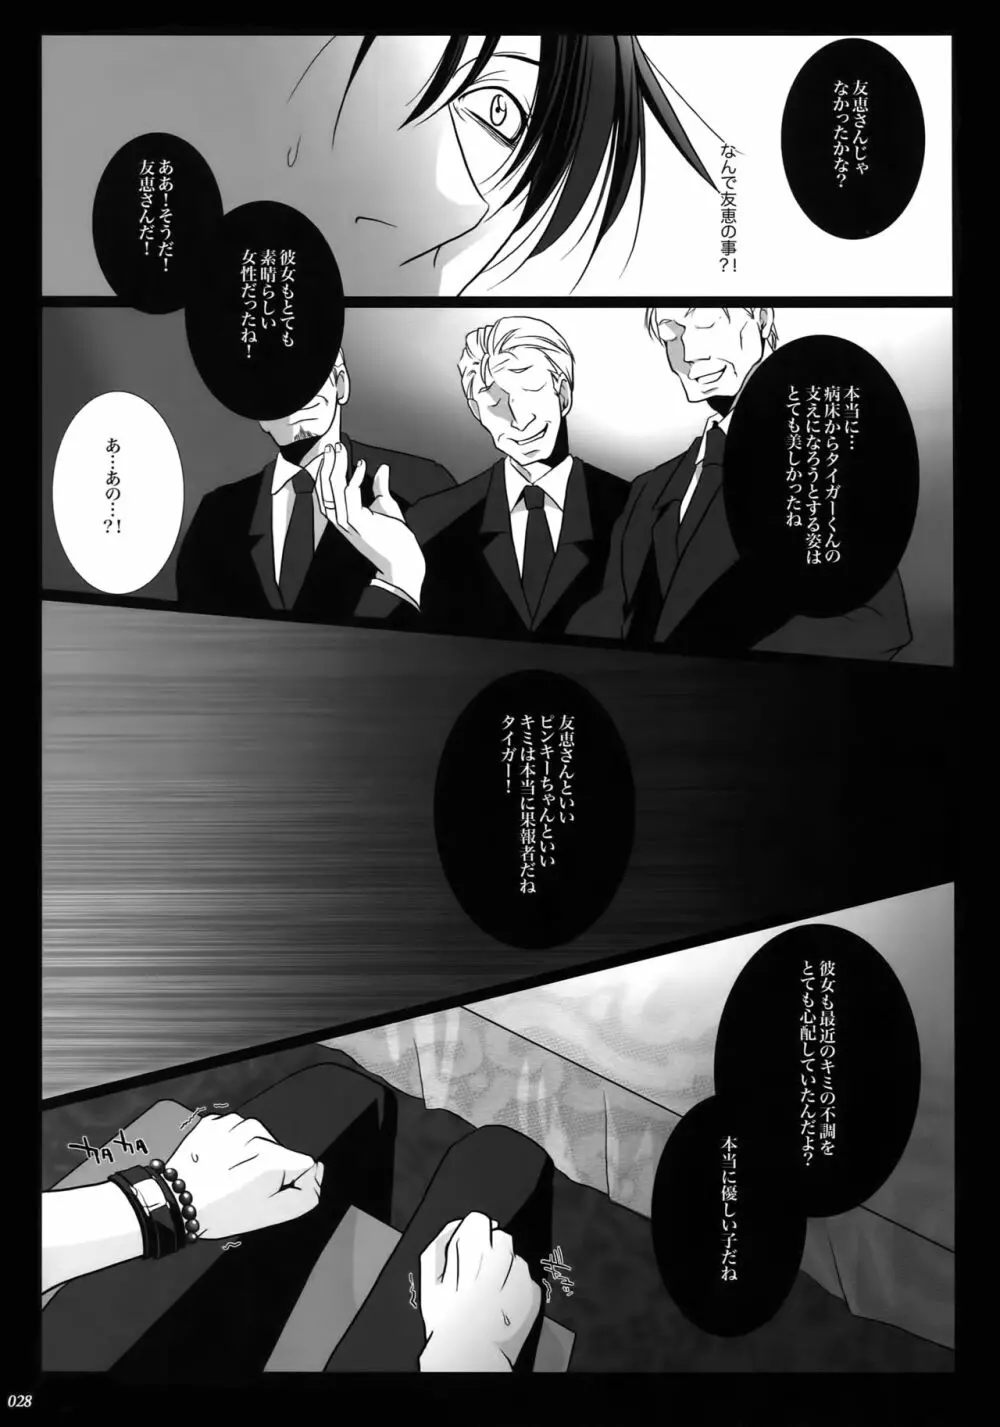 mob;Re Page.27